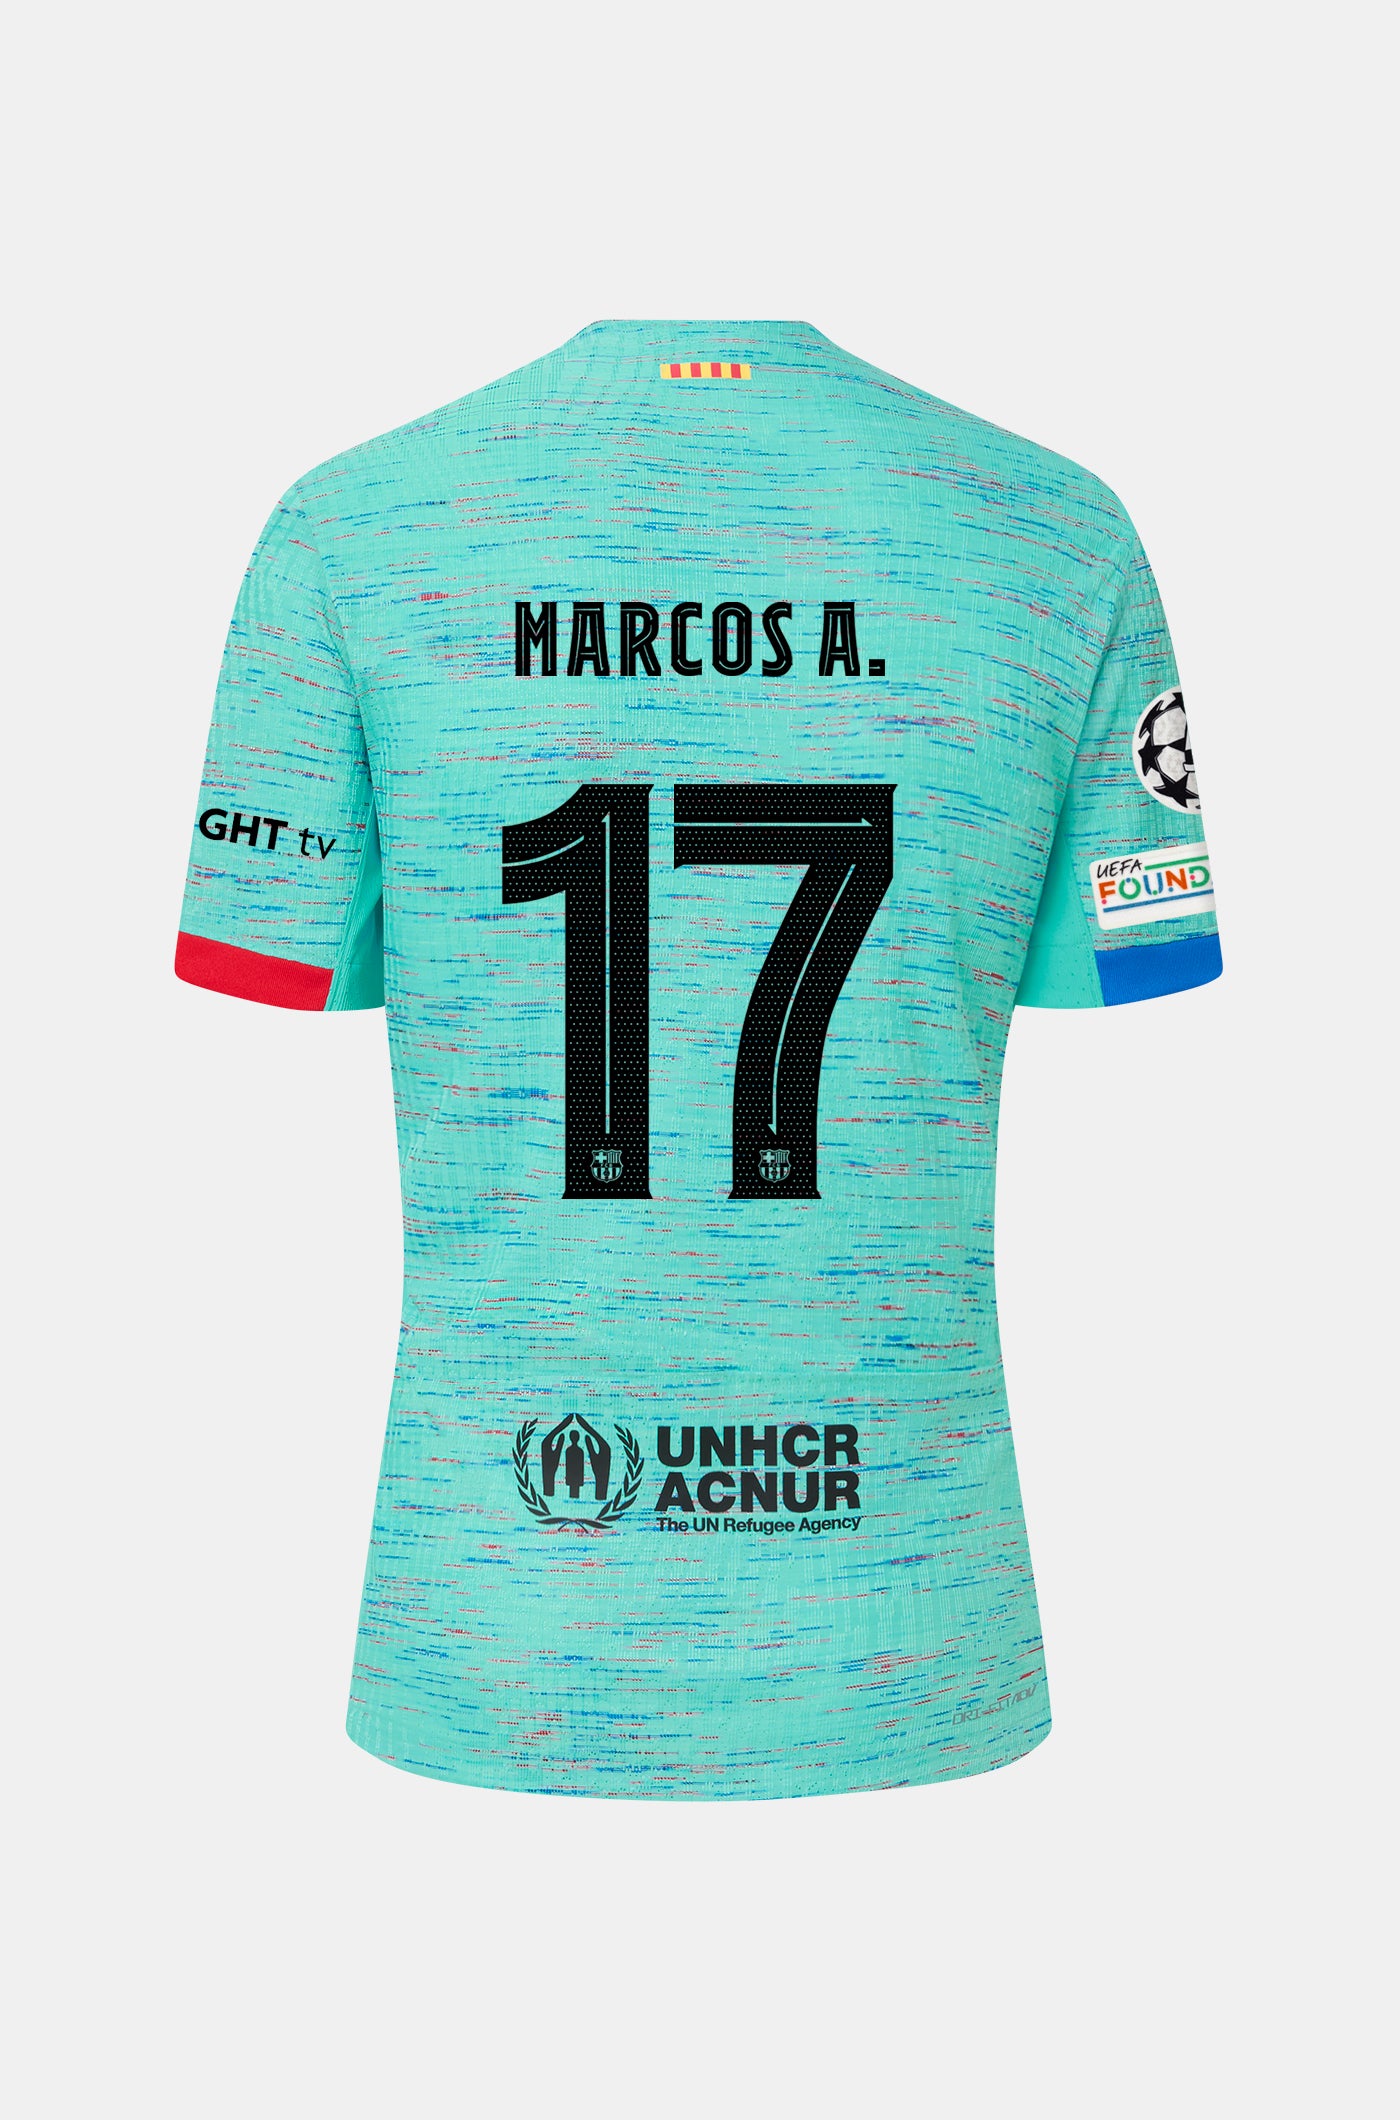 UCL FC Barcelona third shirt 23/24 Player’s Edition - MARCOS A.